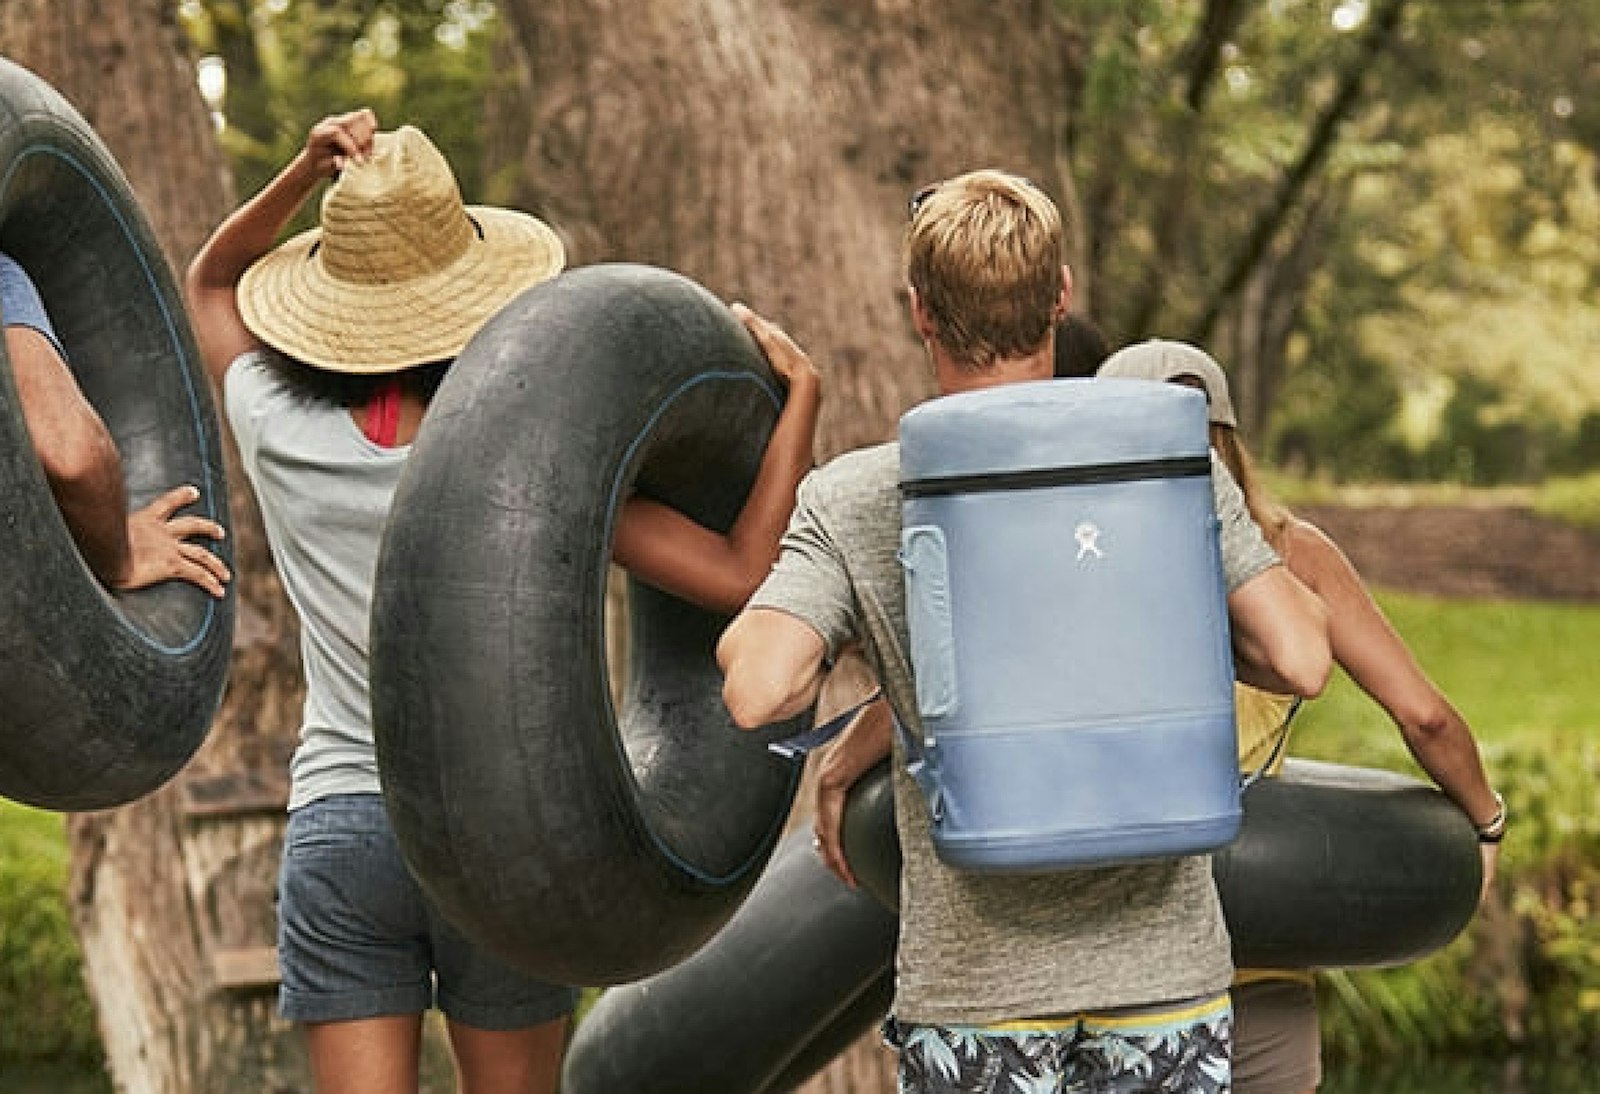 The Hydro Flask brand design backpack cooler worn by hiker carrying a tire tube.